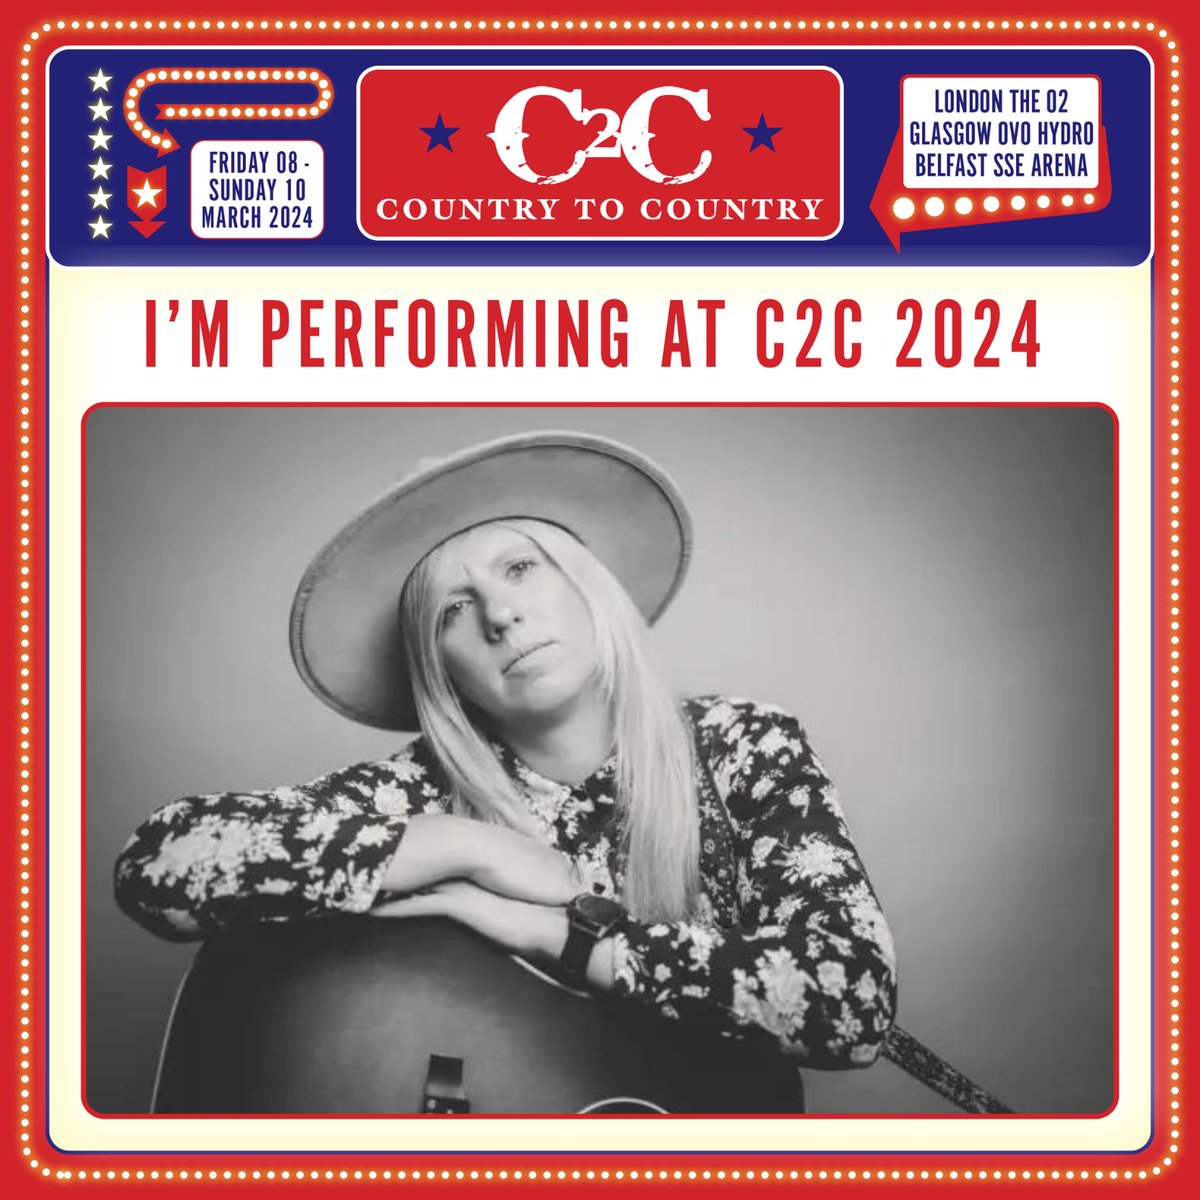 C2C baby! Really chuffed to be performing in London for this amazing weekend of International country music! @C2Cfestival @C2CFans #countrymusicuk #countrymusic